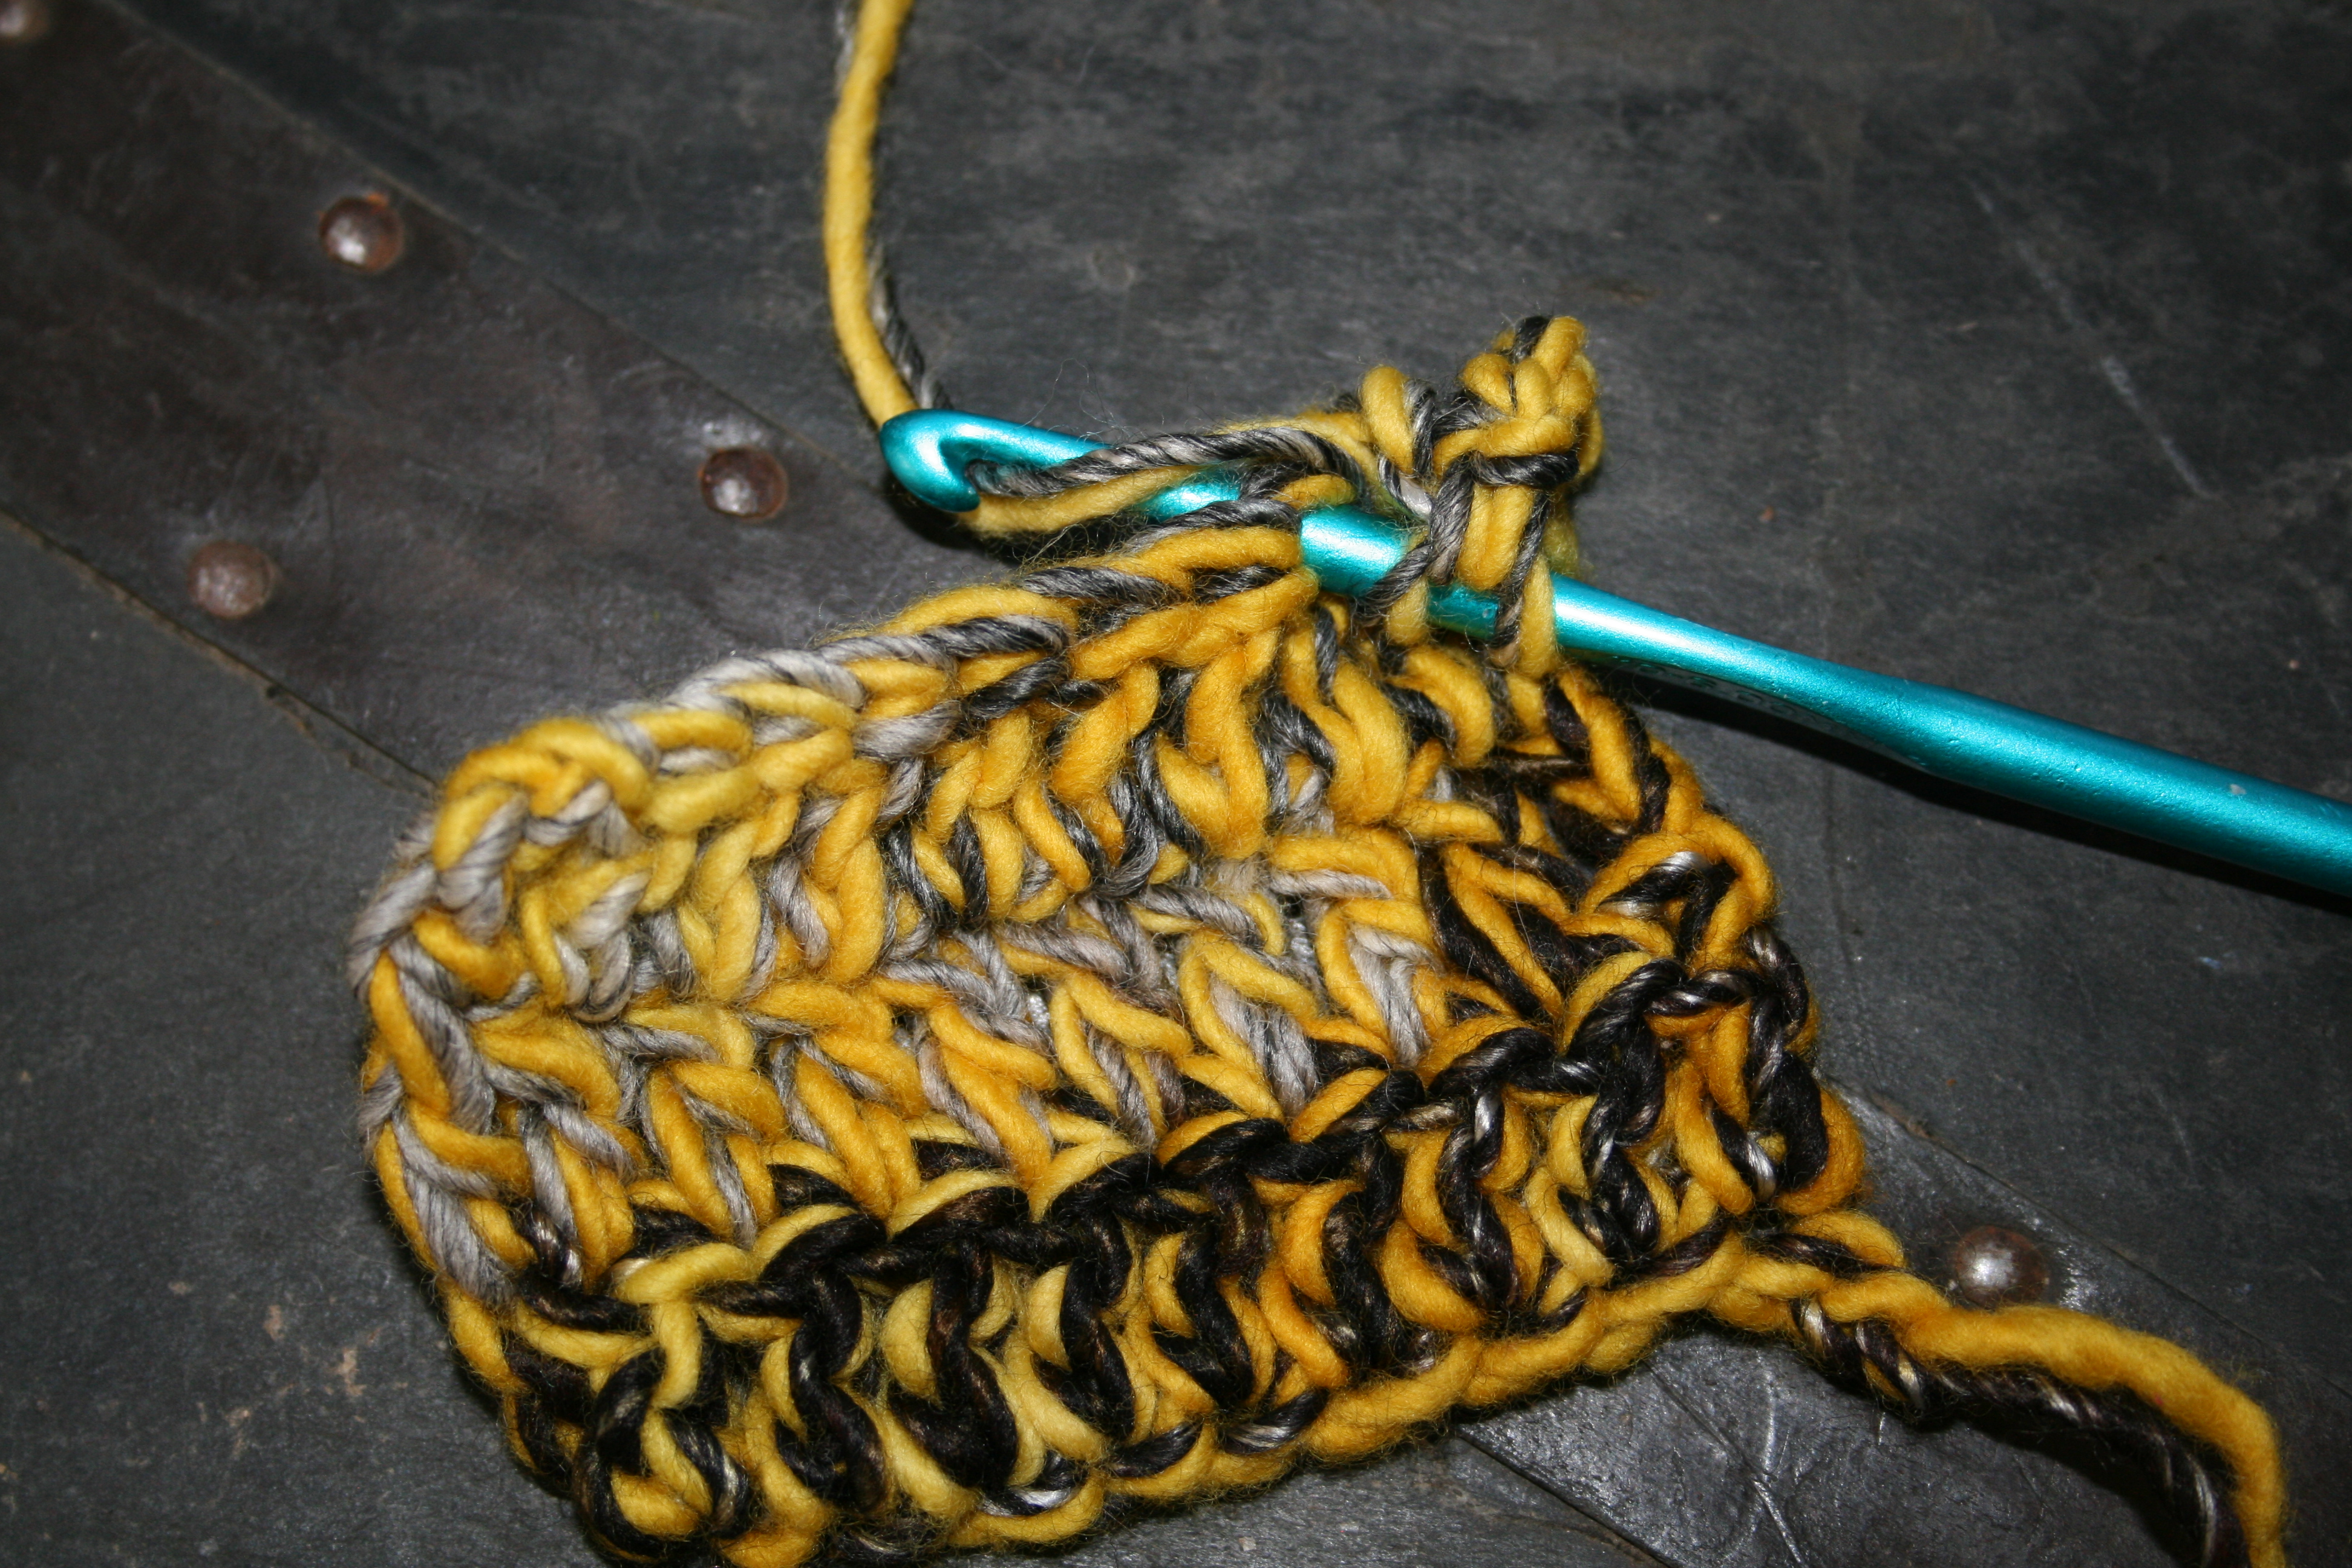 Using speckled yarn for accents and for larger knits